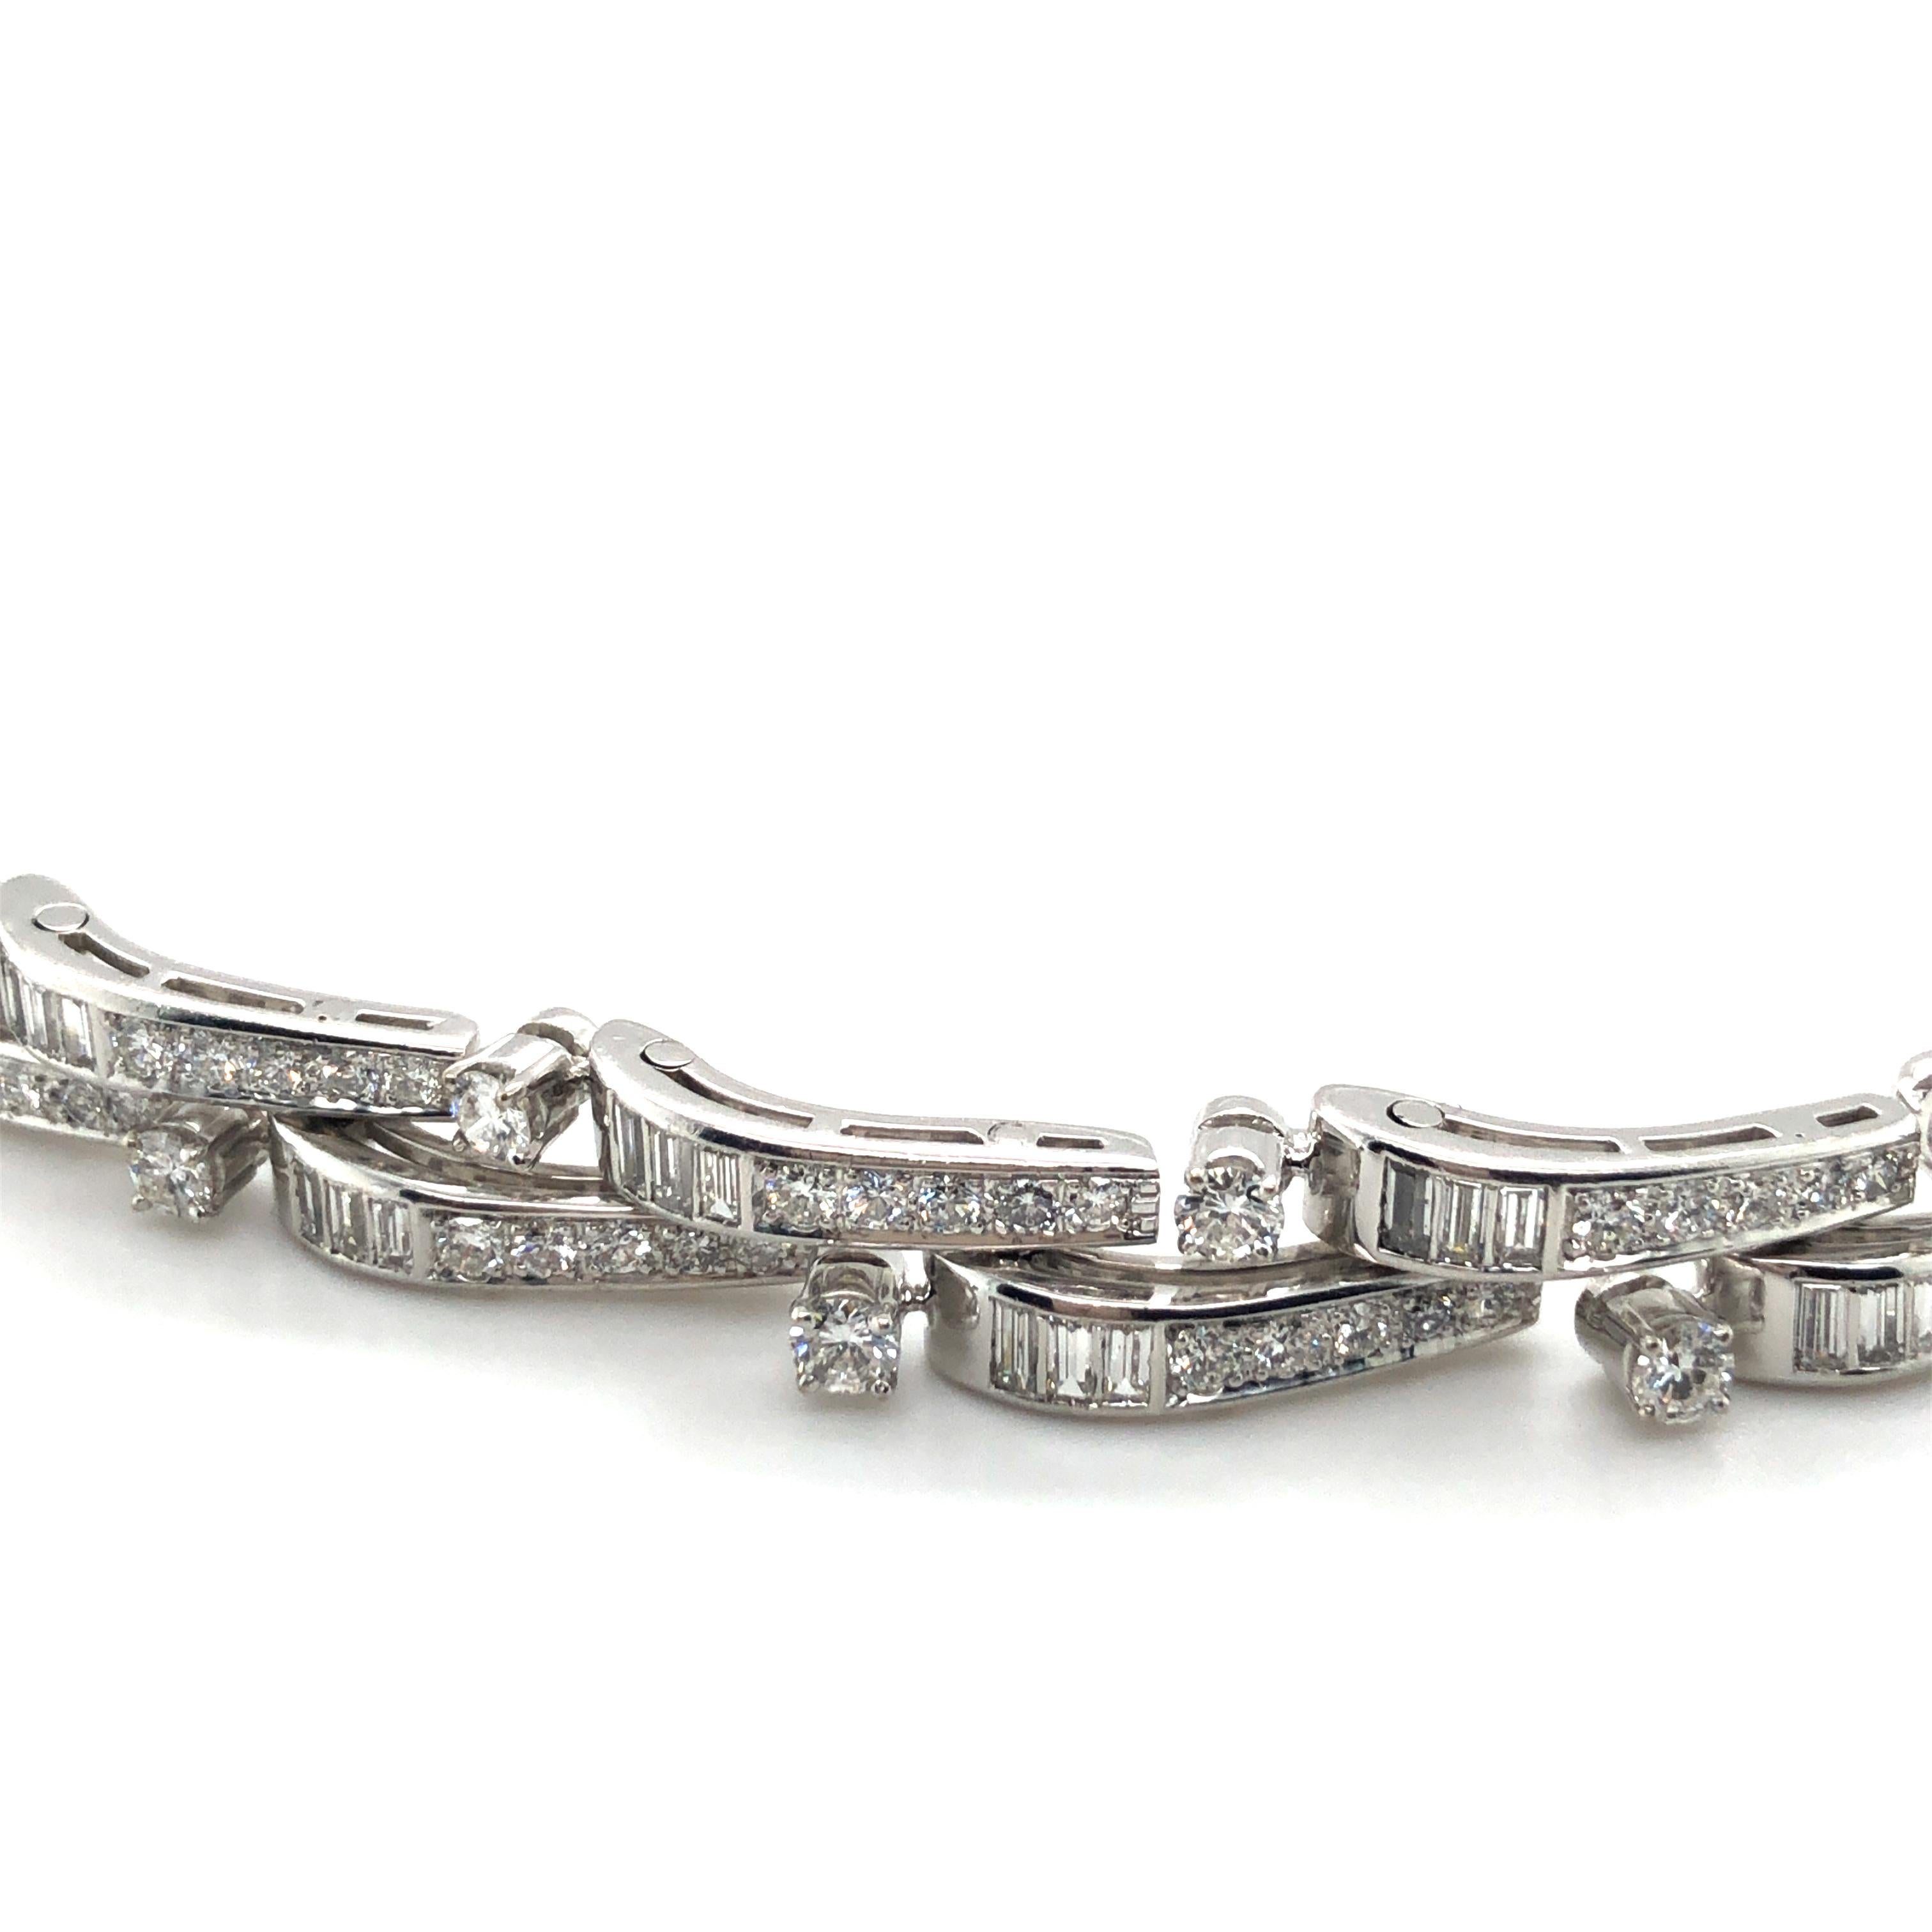 Superbe Diamond Bracelet in 18 Karat White Gold In Excellent Condition For Sale In Lucerne, CH